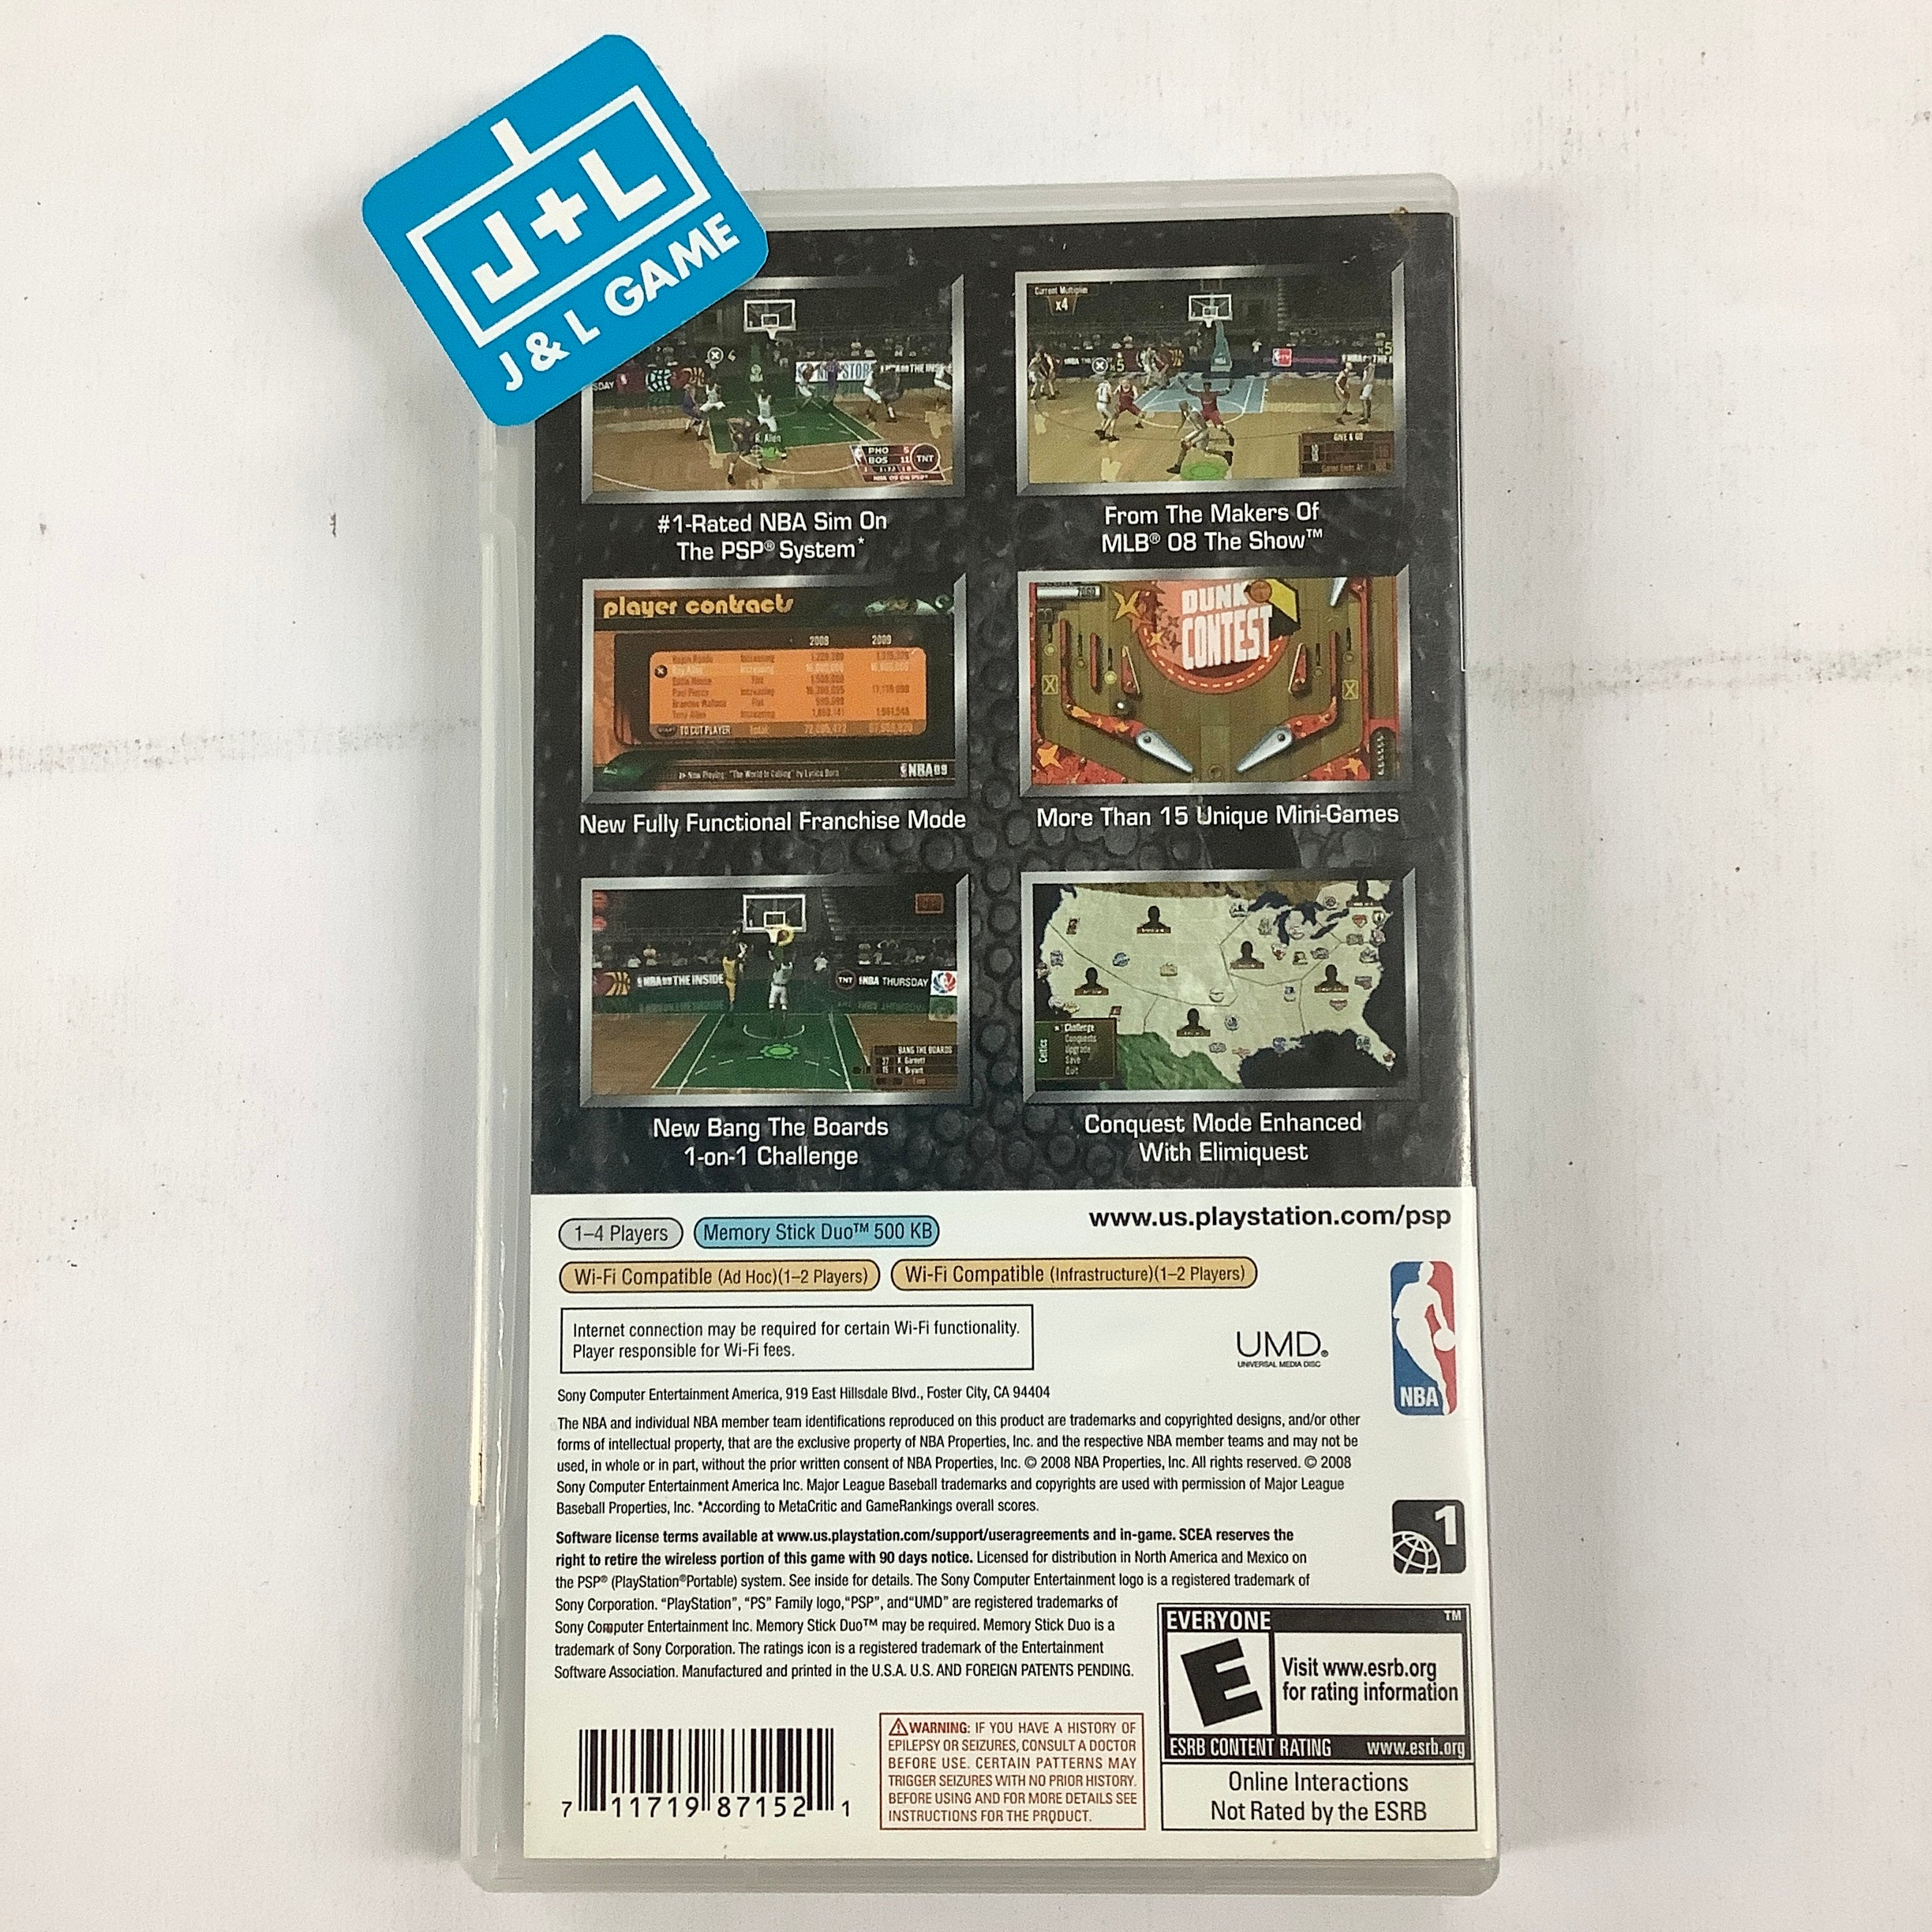 NBA 09 The Inside - SONY PSP [Pre-Owned] Video Games SCEA   